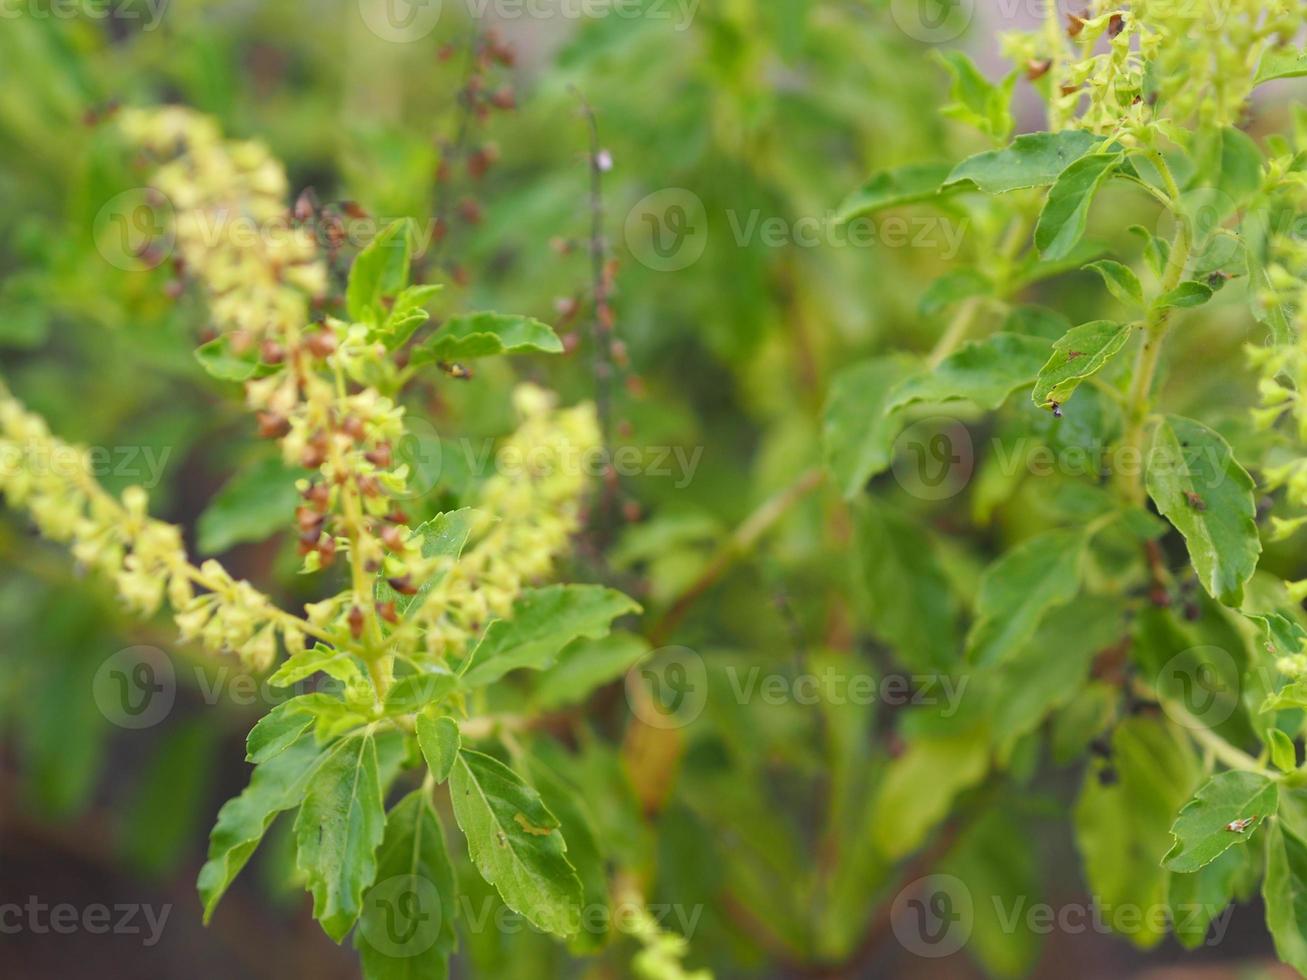 Thai Holy basil Ocimum tenuiflorum sanctum or Tulsi kaphrao Holy basil is an erect, many branched subshrub, 30 to 60 cm tall with hairy stems Leaves are green vegetable with flower blooming in garden photo